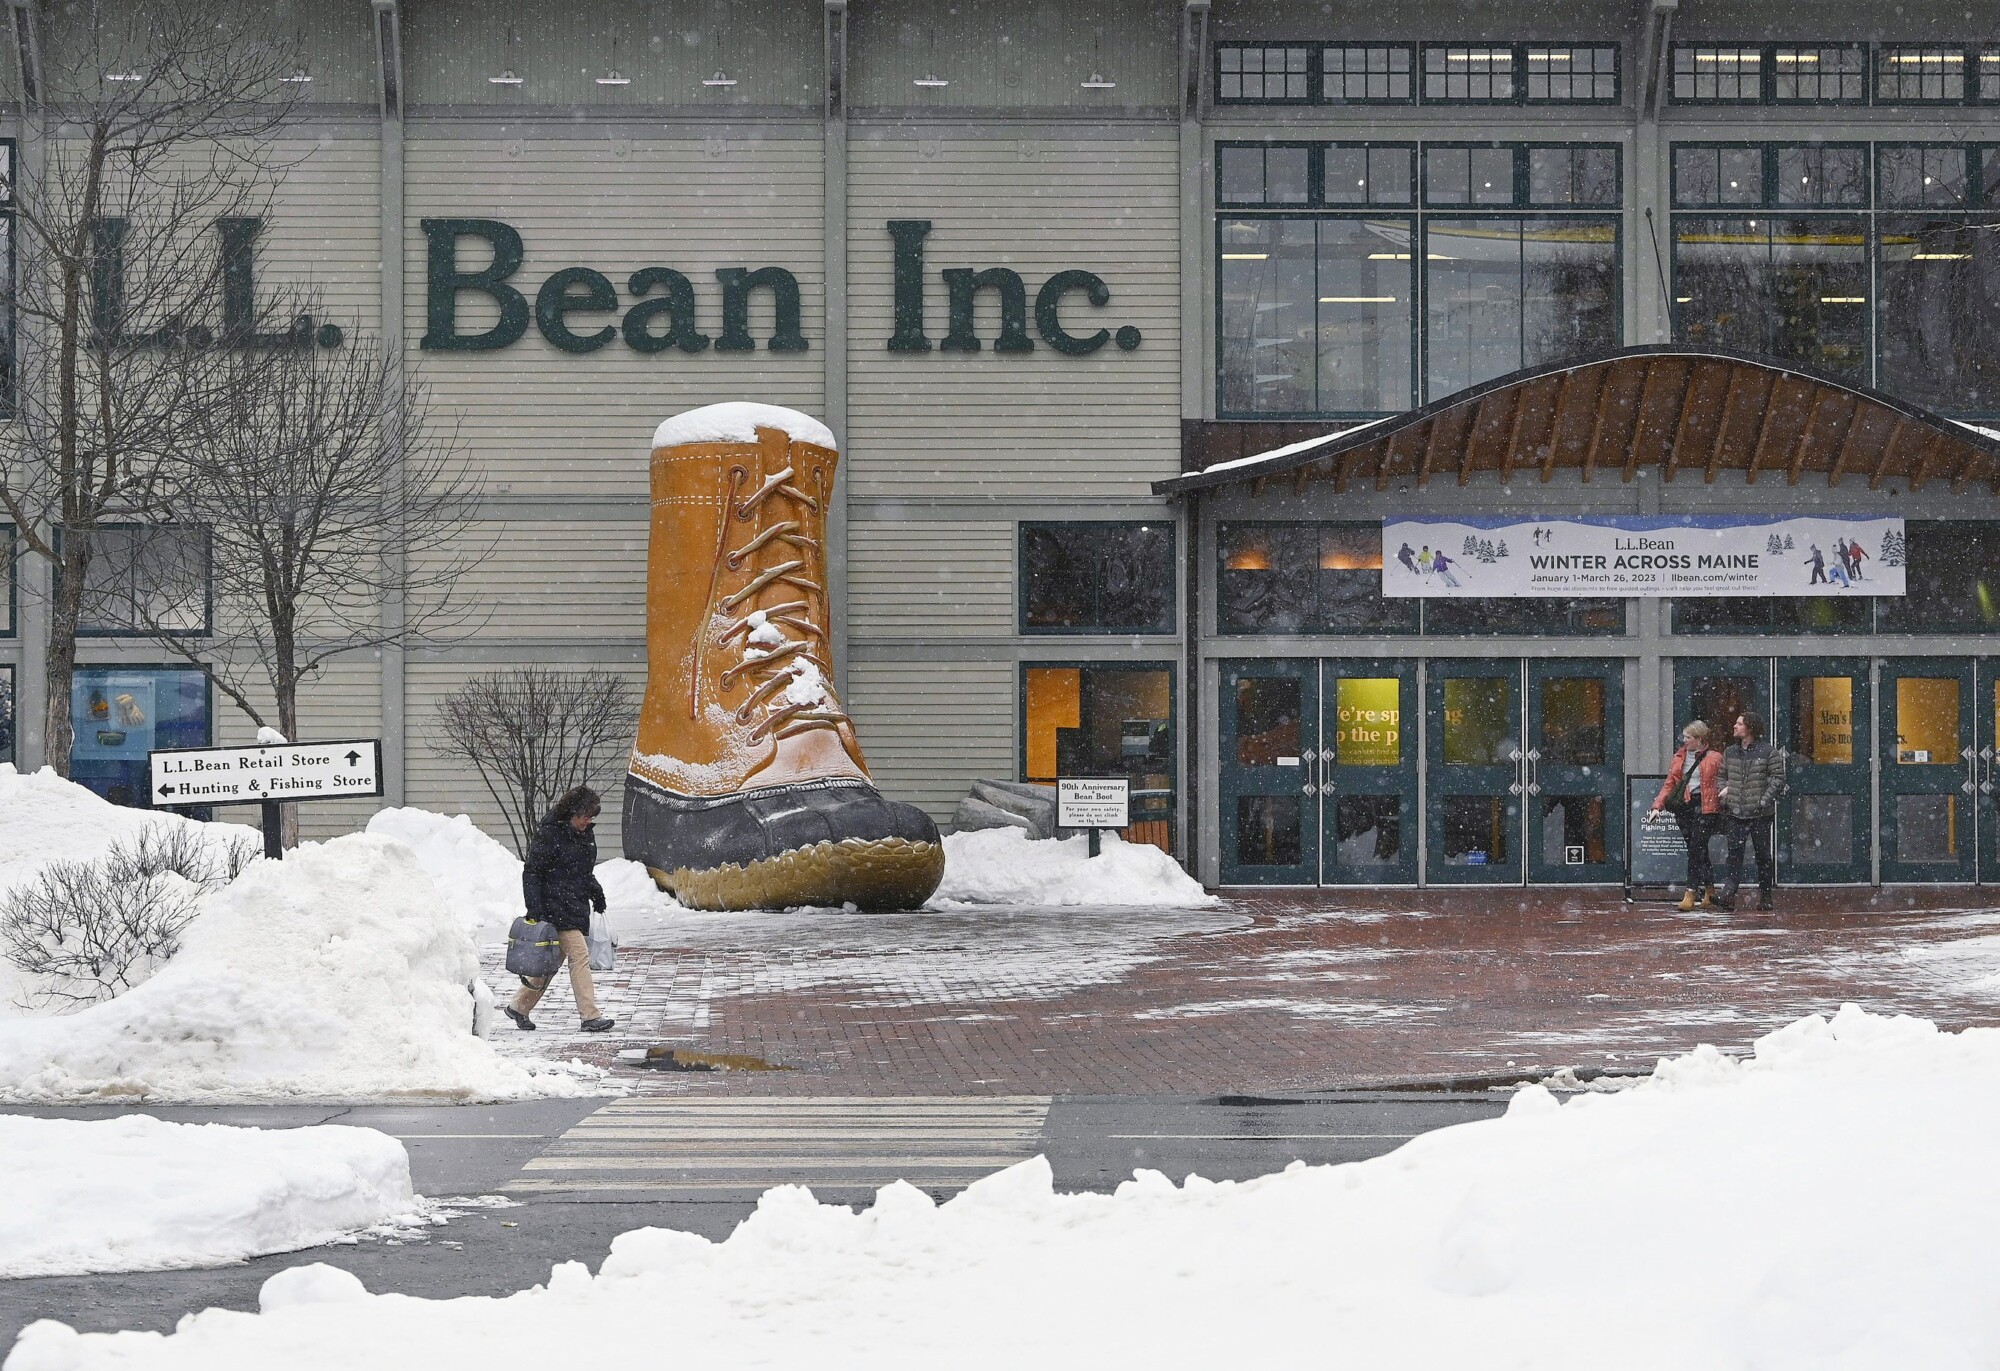 Over a century since launching its famed boots, L.L. Bean sued over a  'waterproof' claim